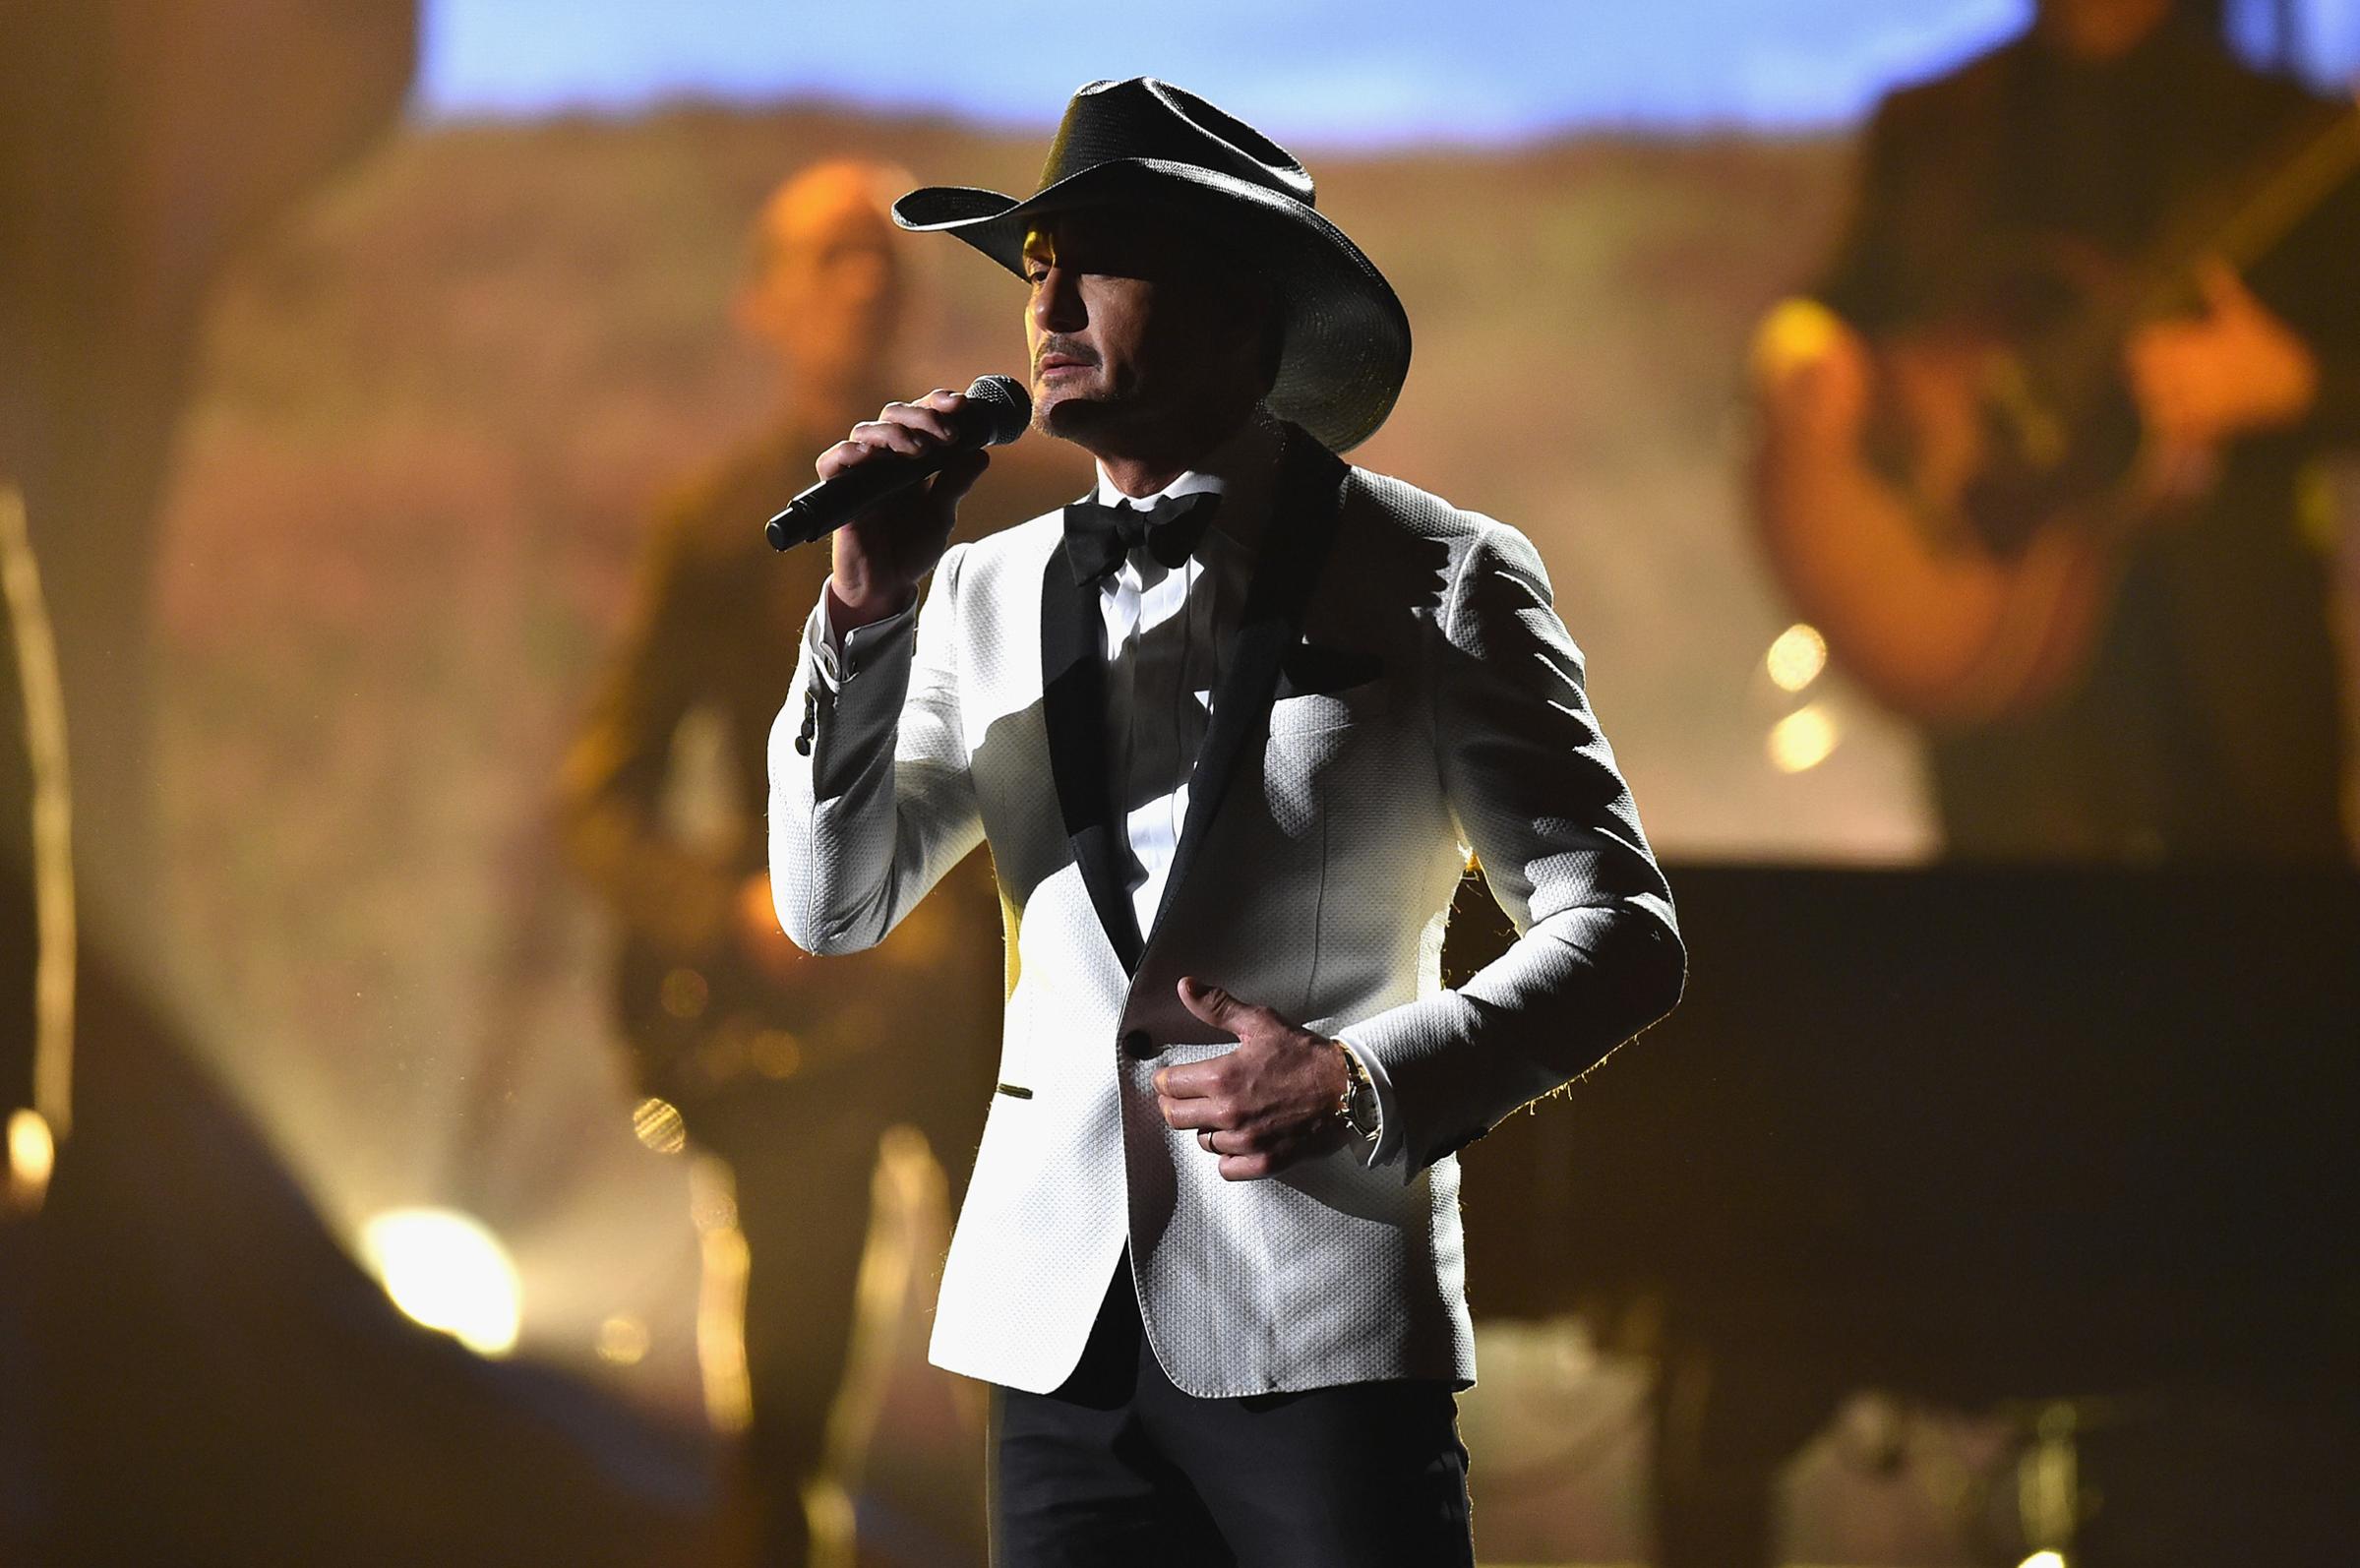 Tim McGraw performs onstage at the 51st annual CMA Awards at the Bridgestone Arena on Nov. 8, 2017.